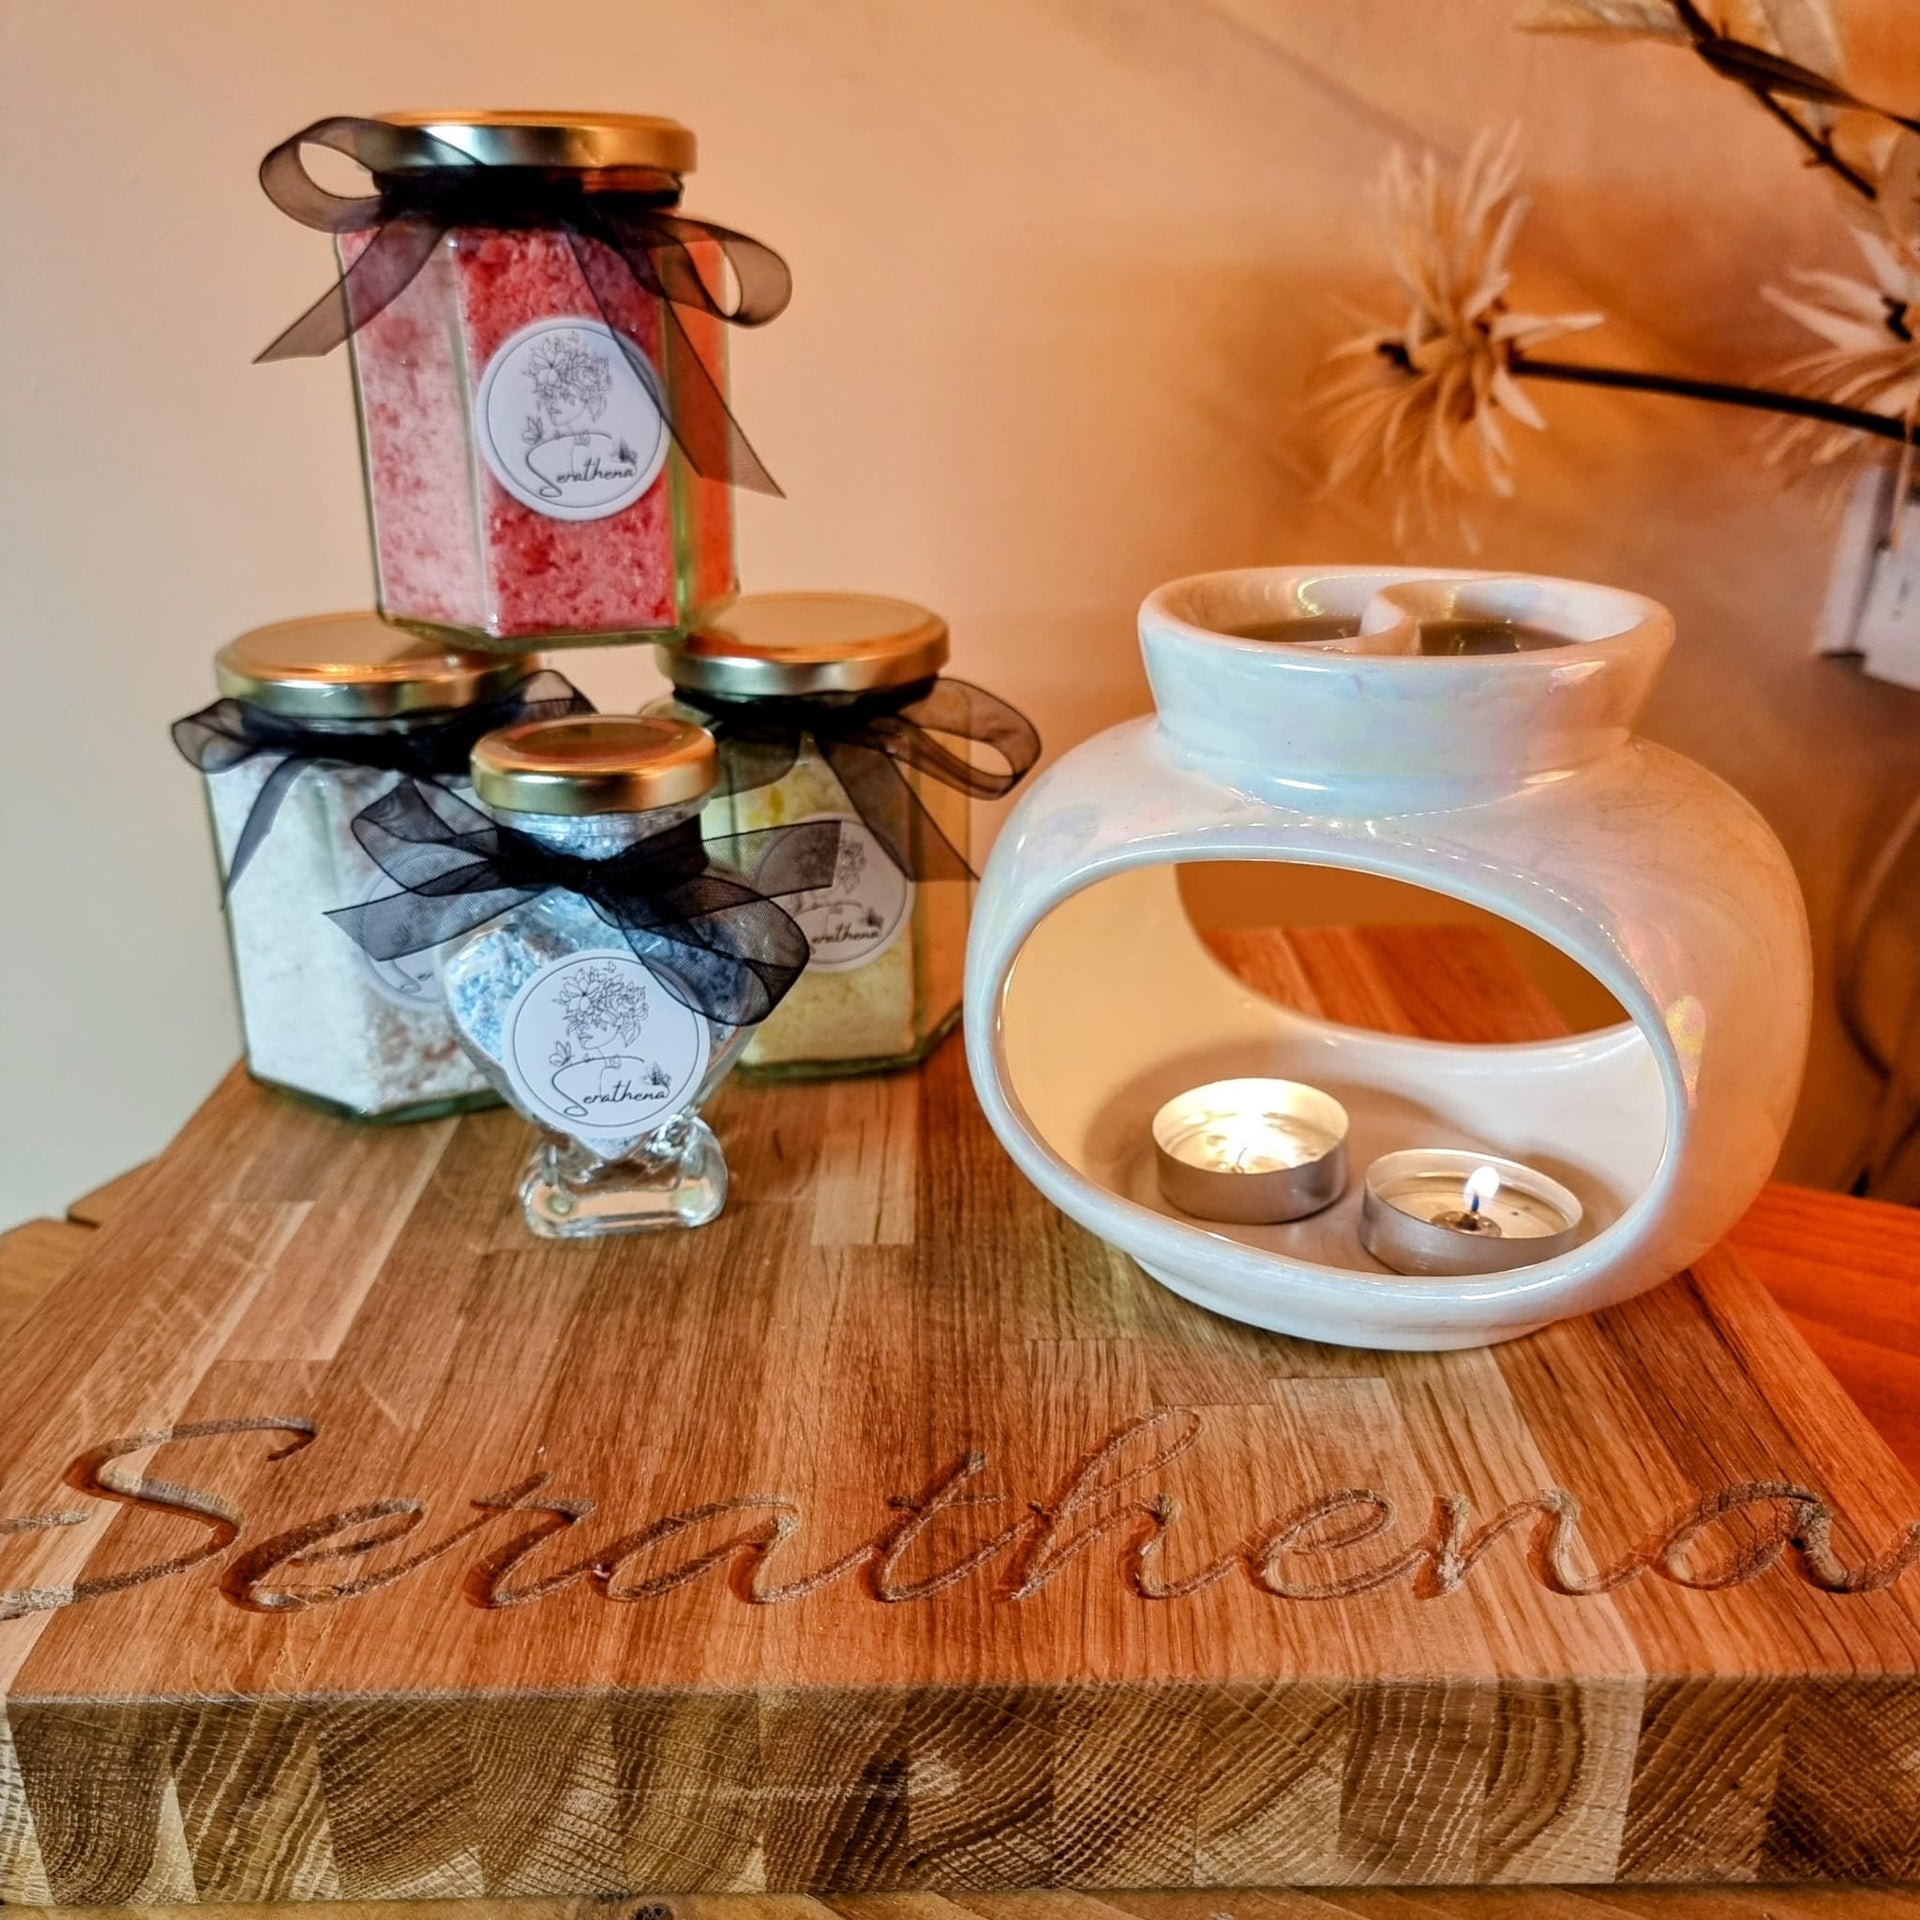 25 Things to Look for When Buying Wax Melts? – Serathena